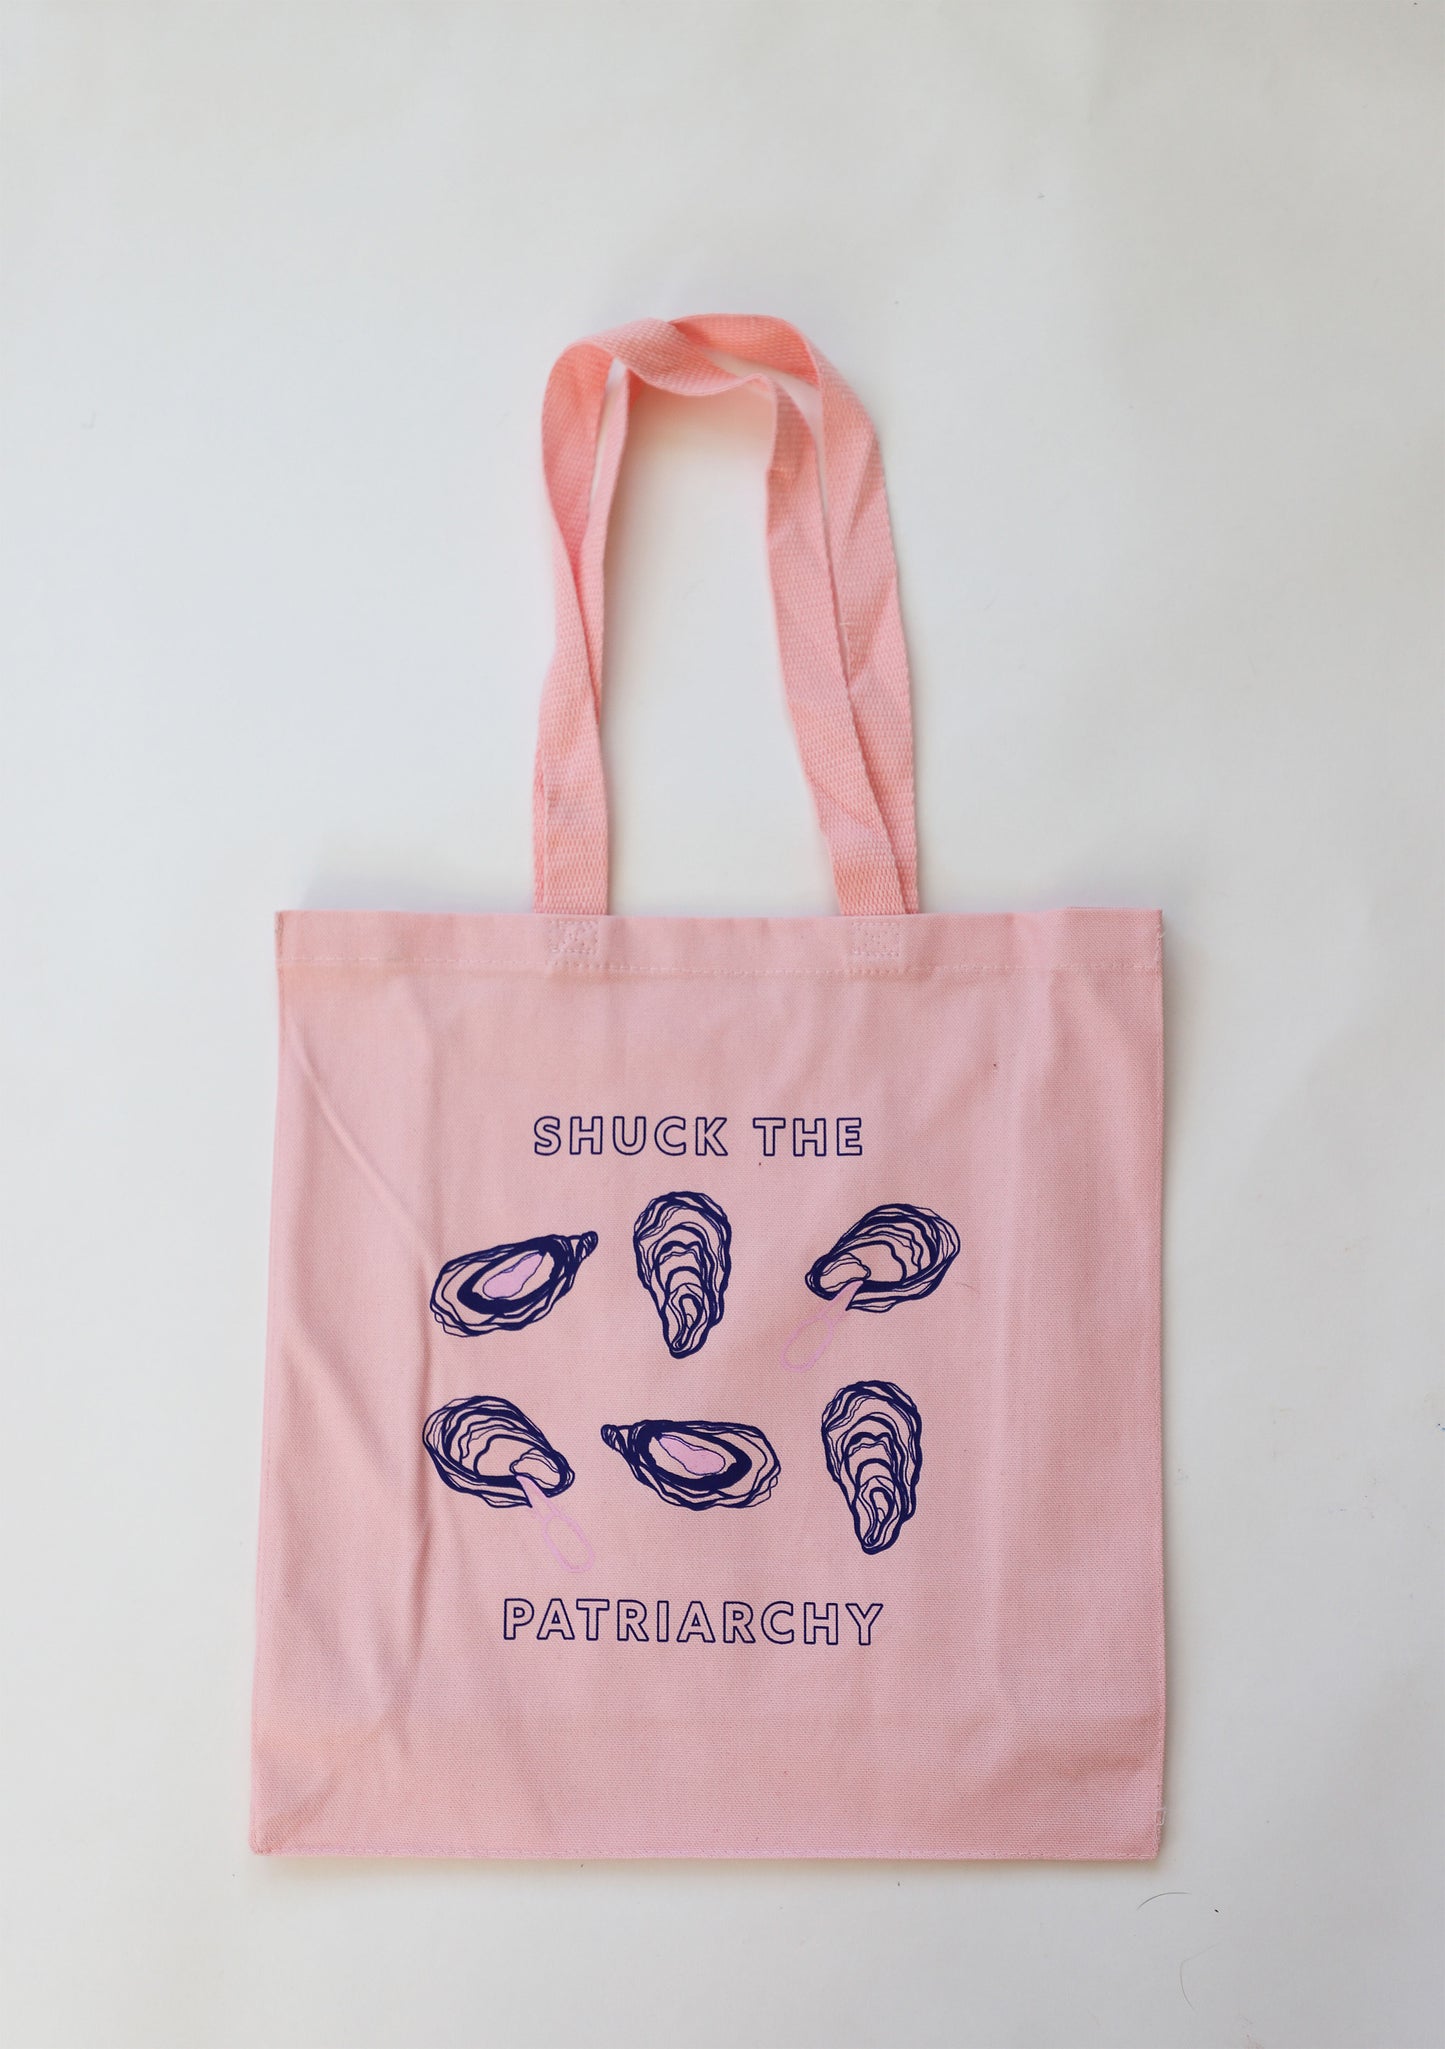 A pink canvas tote that reads "Shuck the Patriarchy" with oyster designs